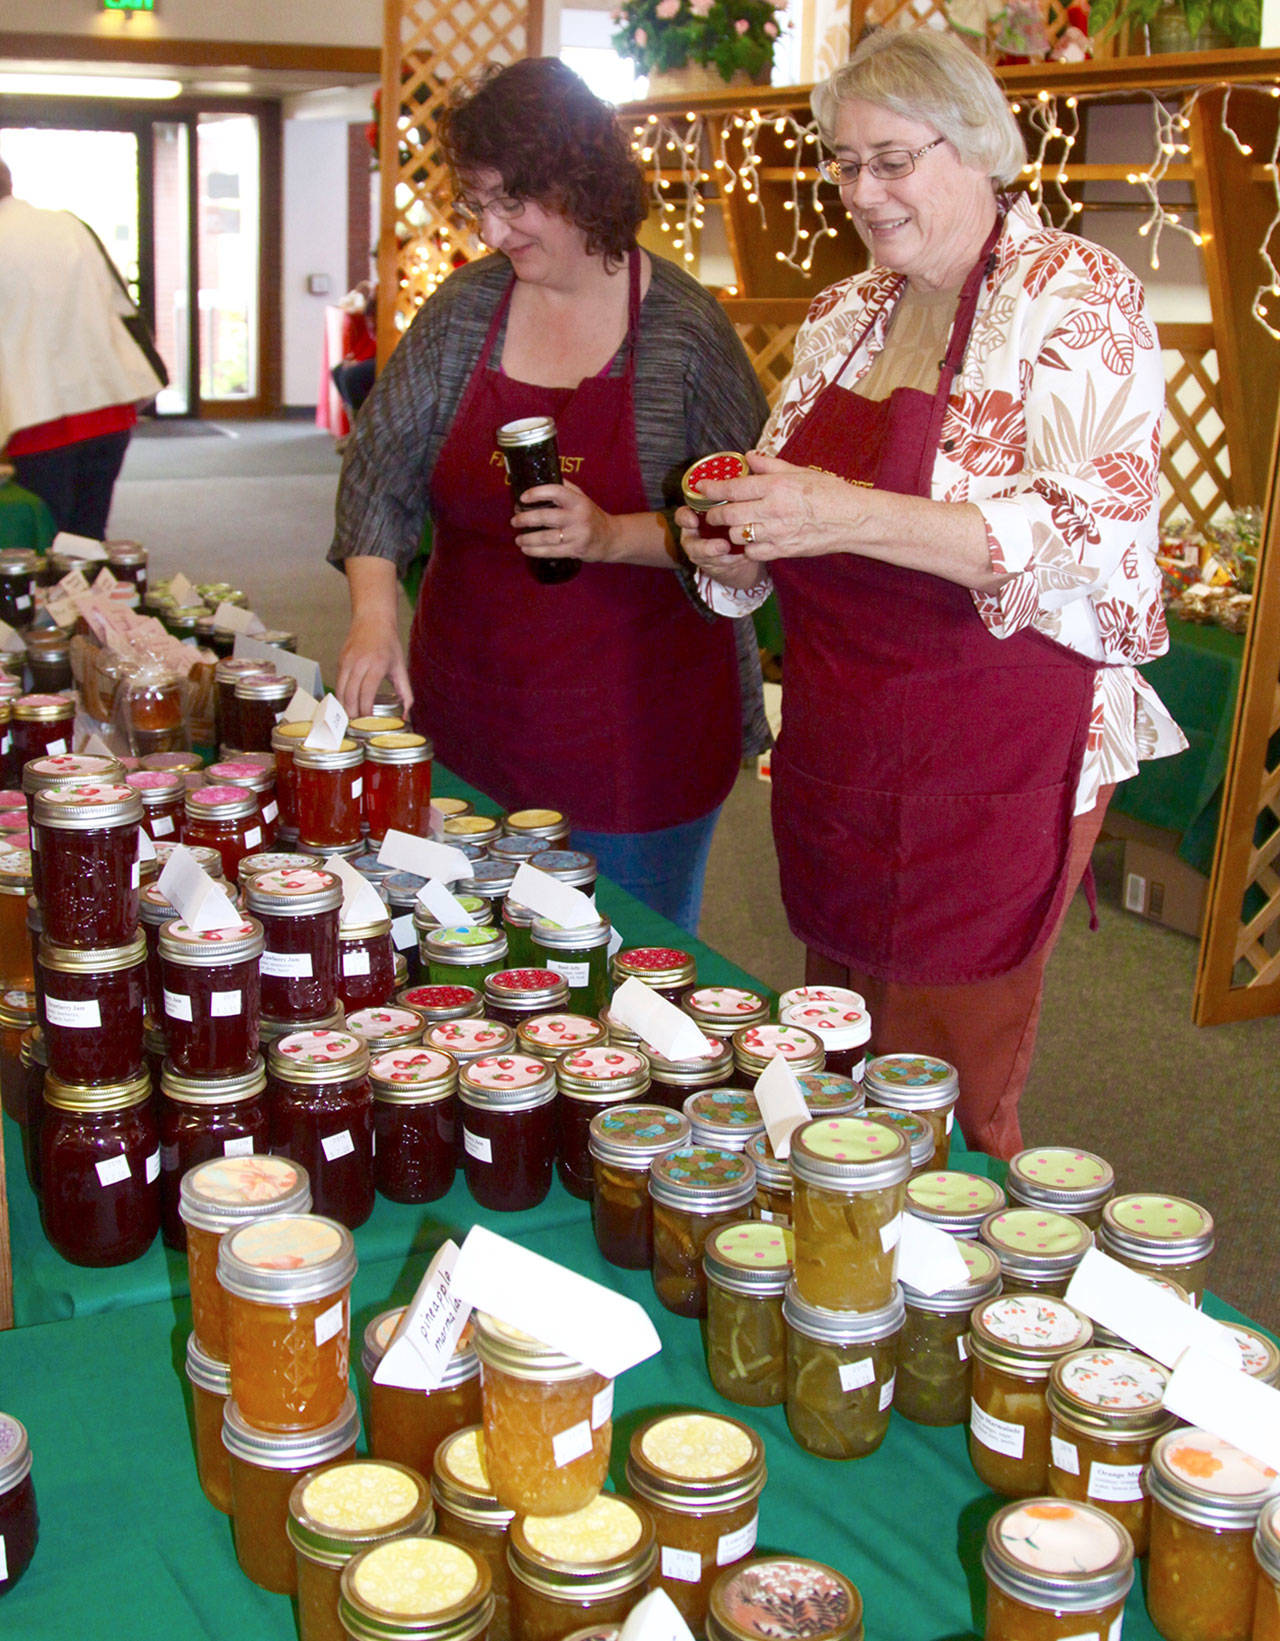 The Christmas Bizarre season is upon us now. Seven organizations have their bizarres this first weekend in November. Pictured here is preparation for the bizarre at the First Baptist Church in 2016. Kim Luker, left, and Robin Sweeney look over the many jars of handmade jams and jellies especially made for the public sale. (Dave Logan/for Peninsula Daily News)